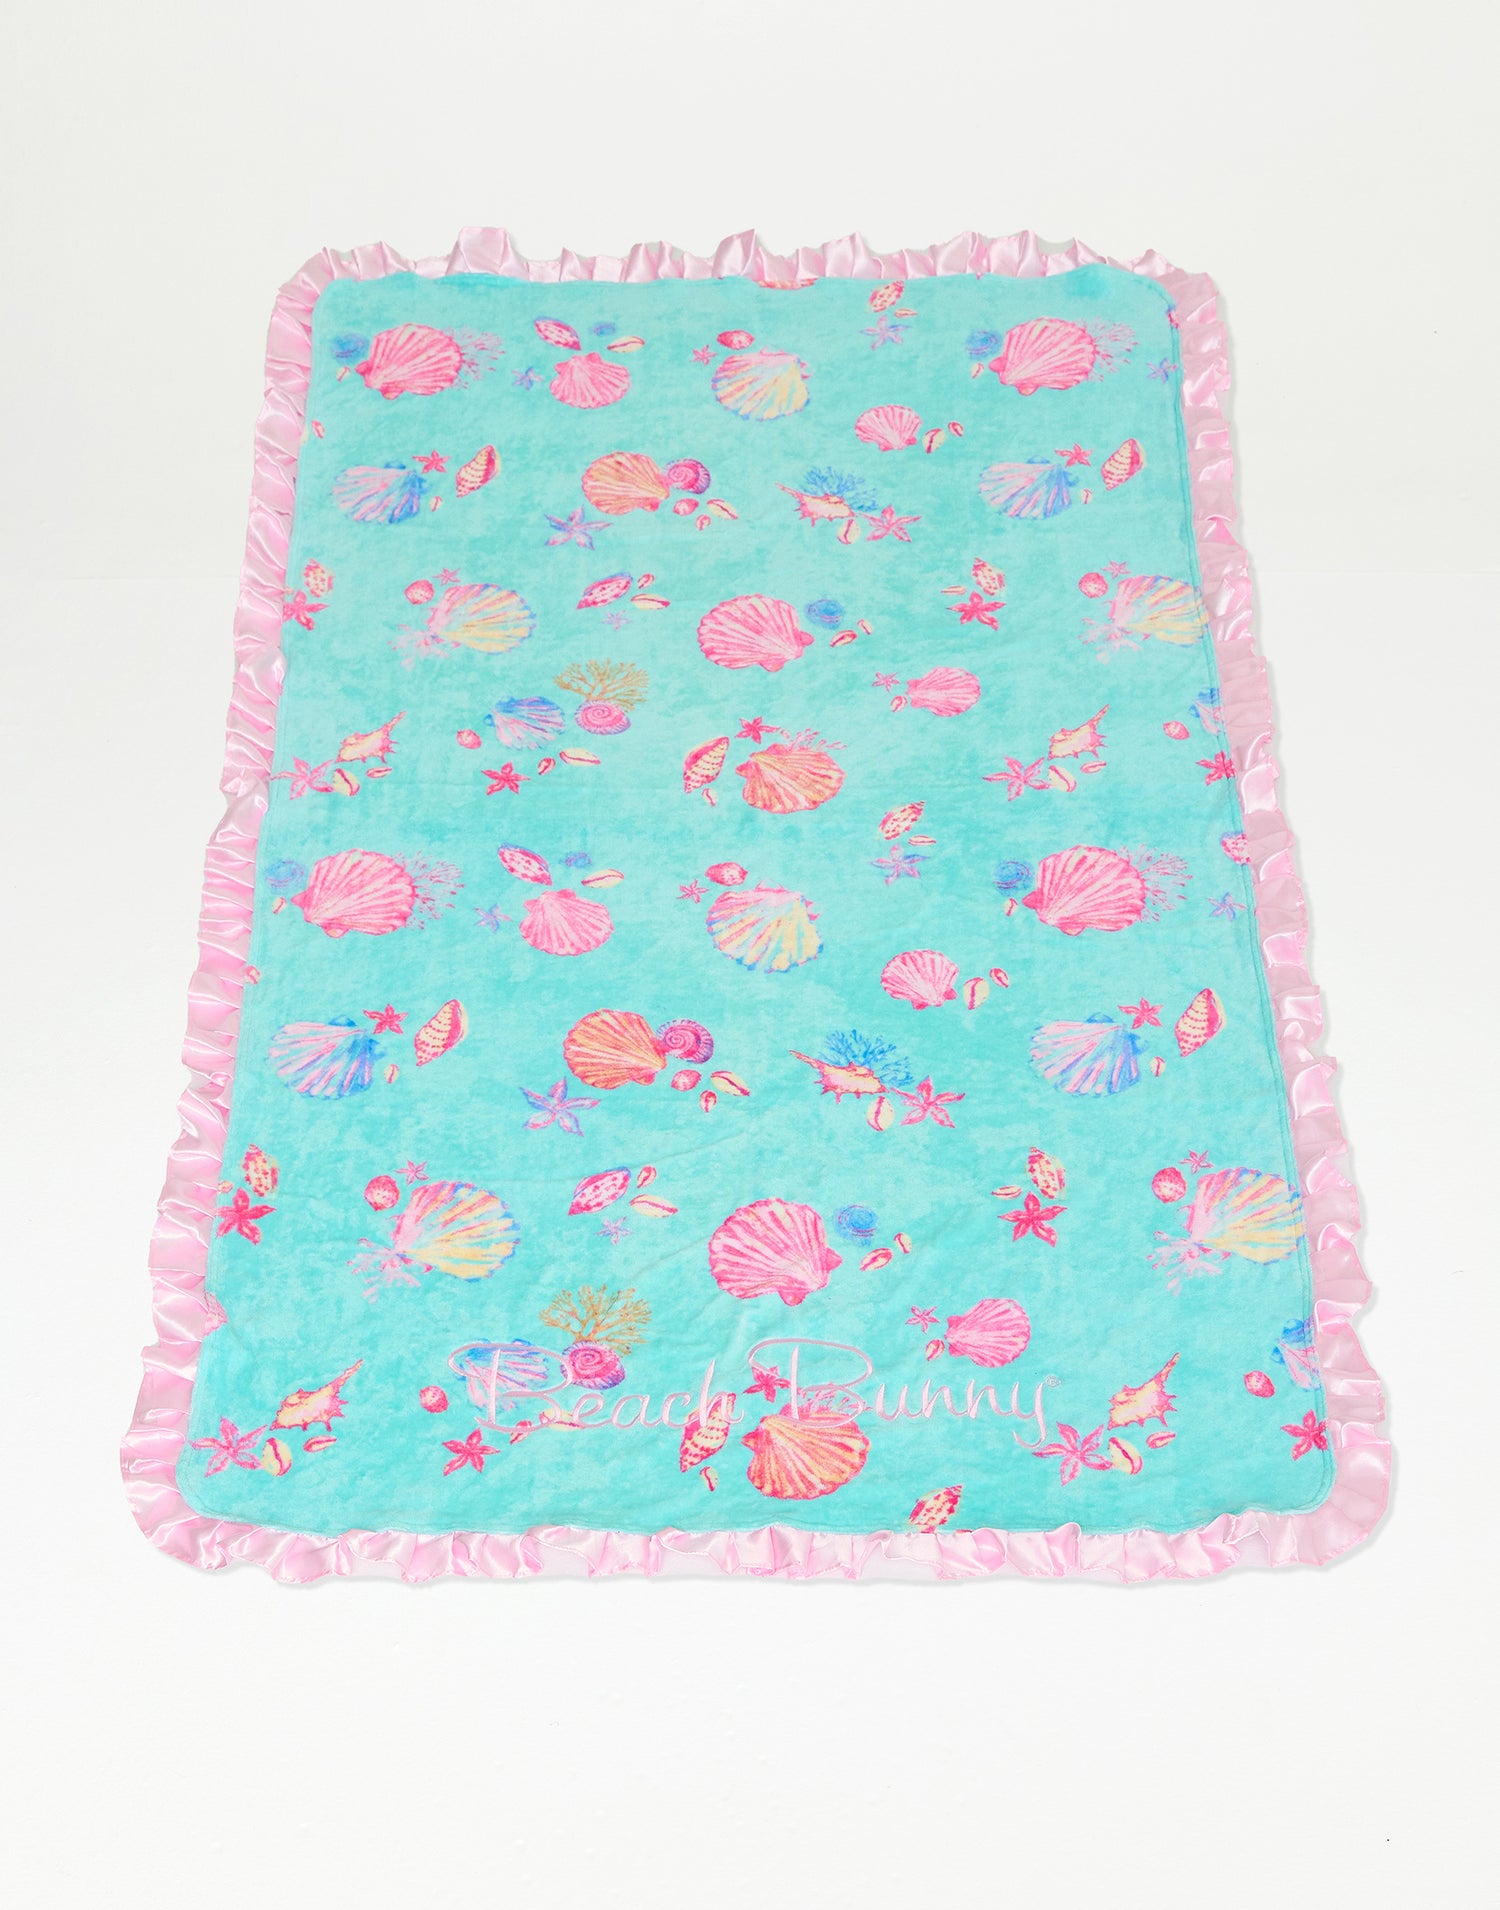 Blue Ditsy Shell Beach Towel with Pink Ruffle Trim - Product View